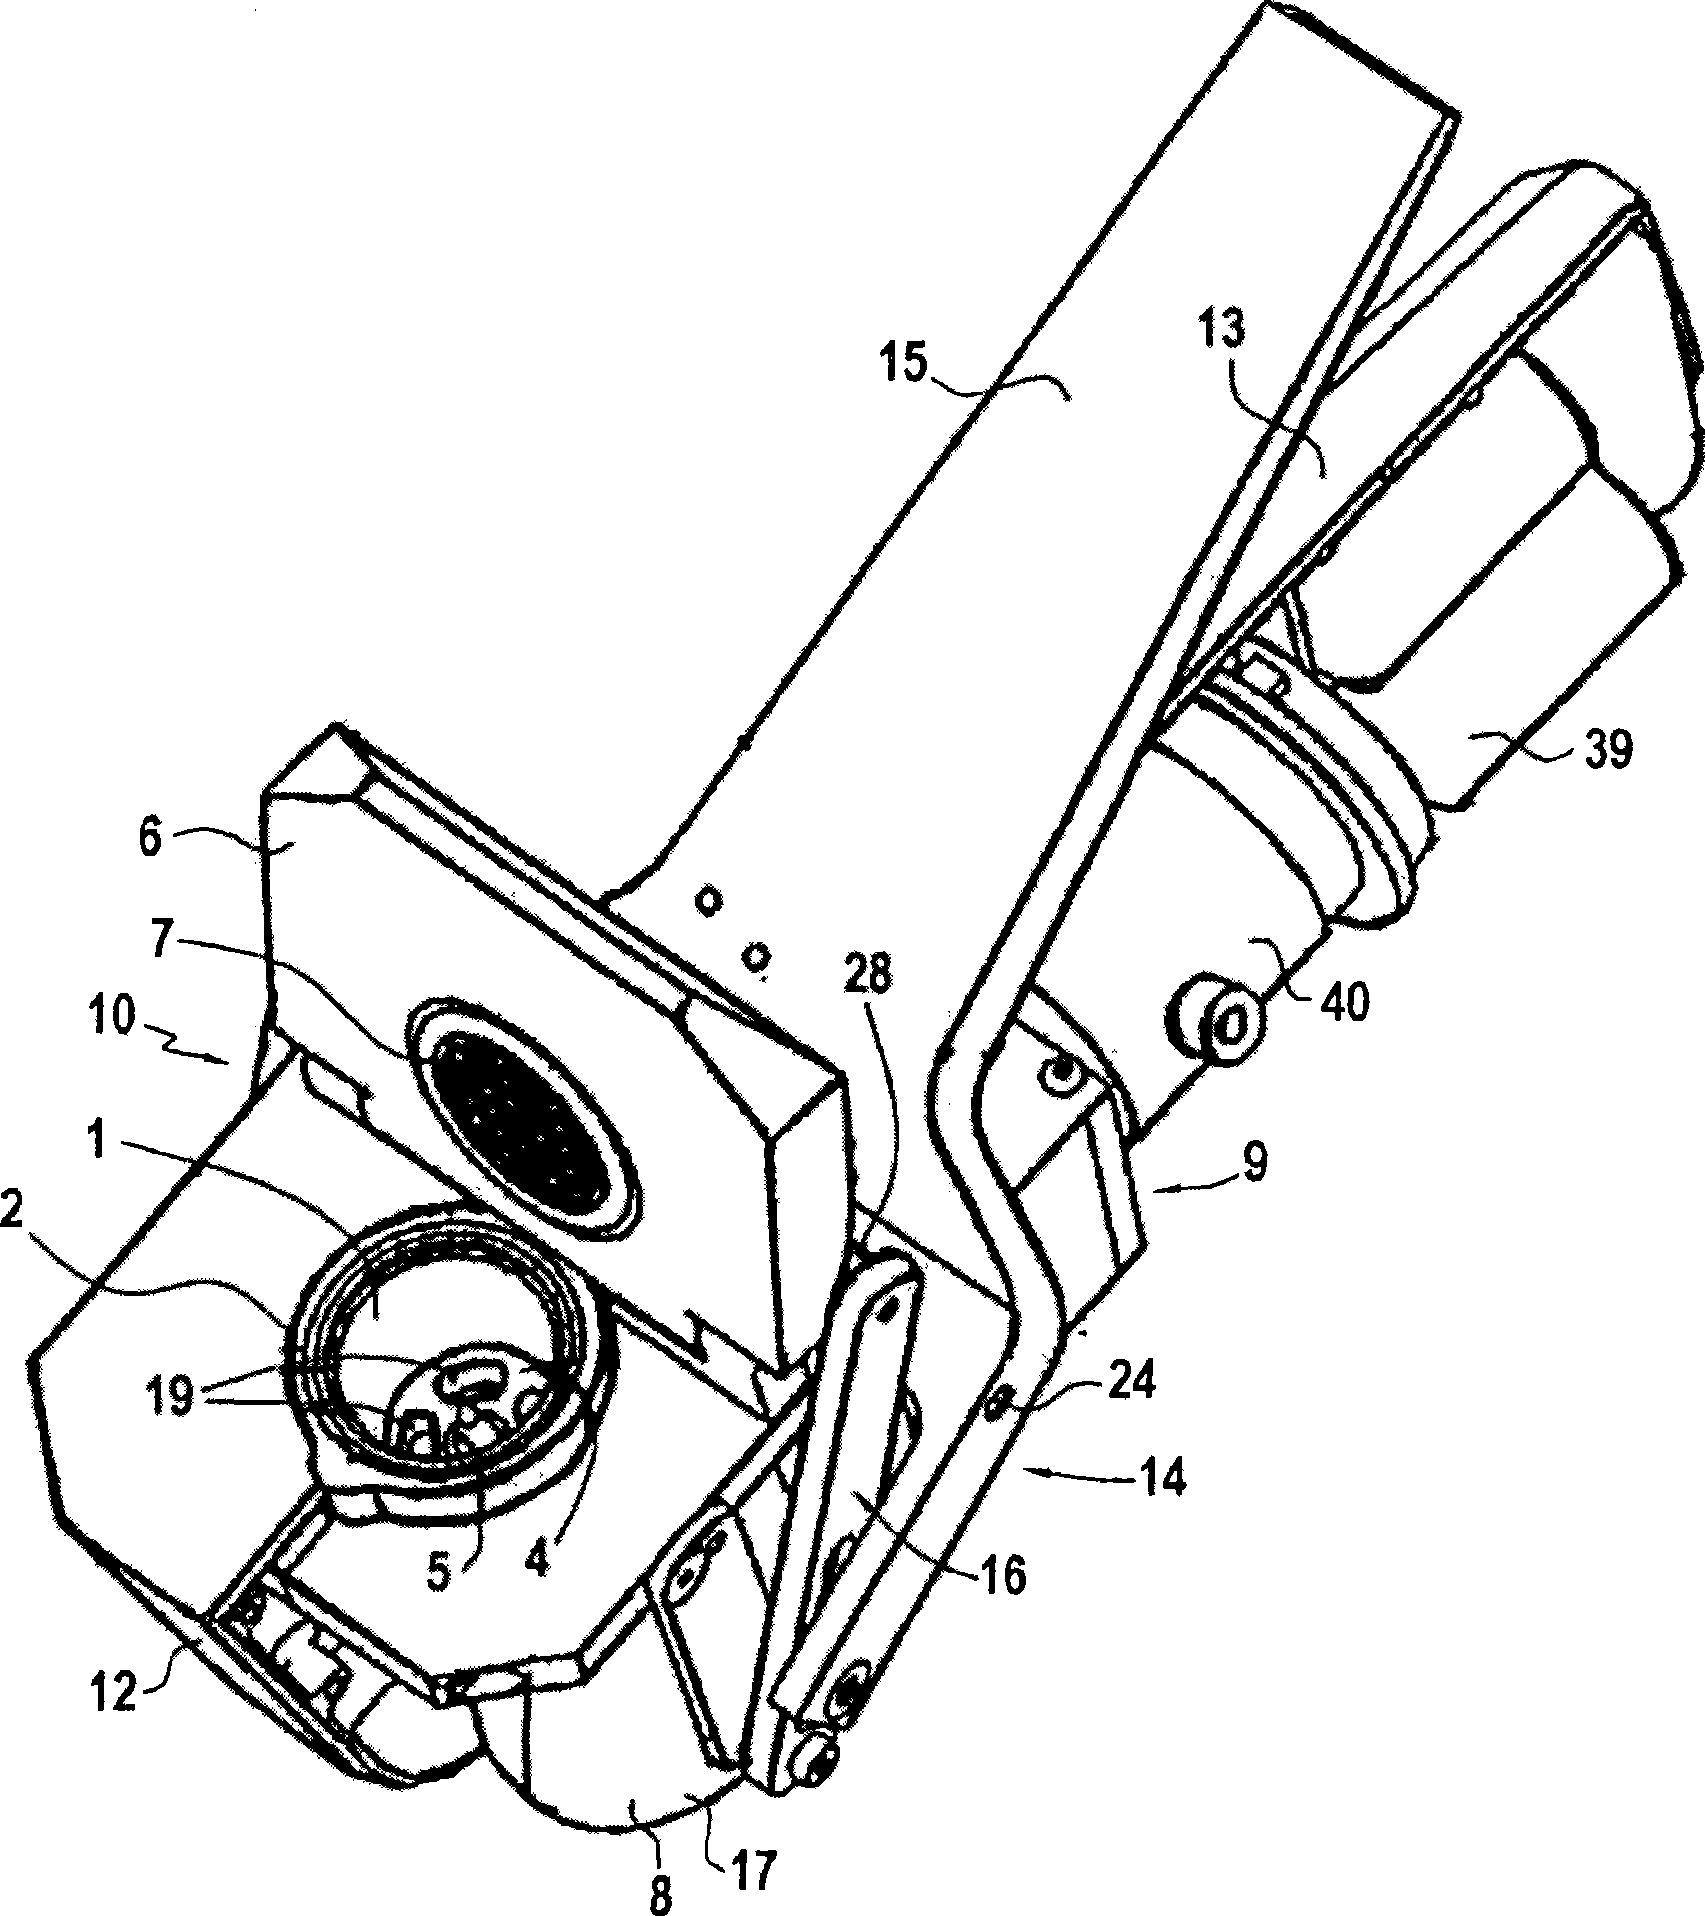 Appliance for brewing coffee or tea